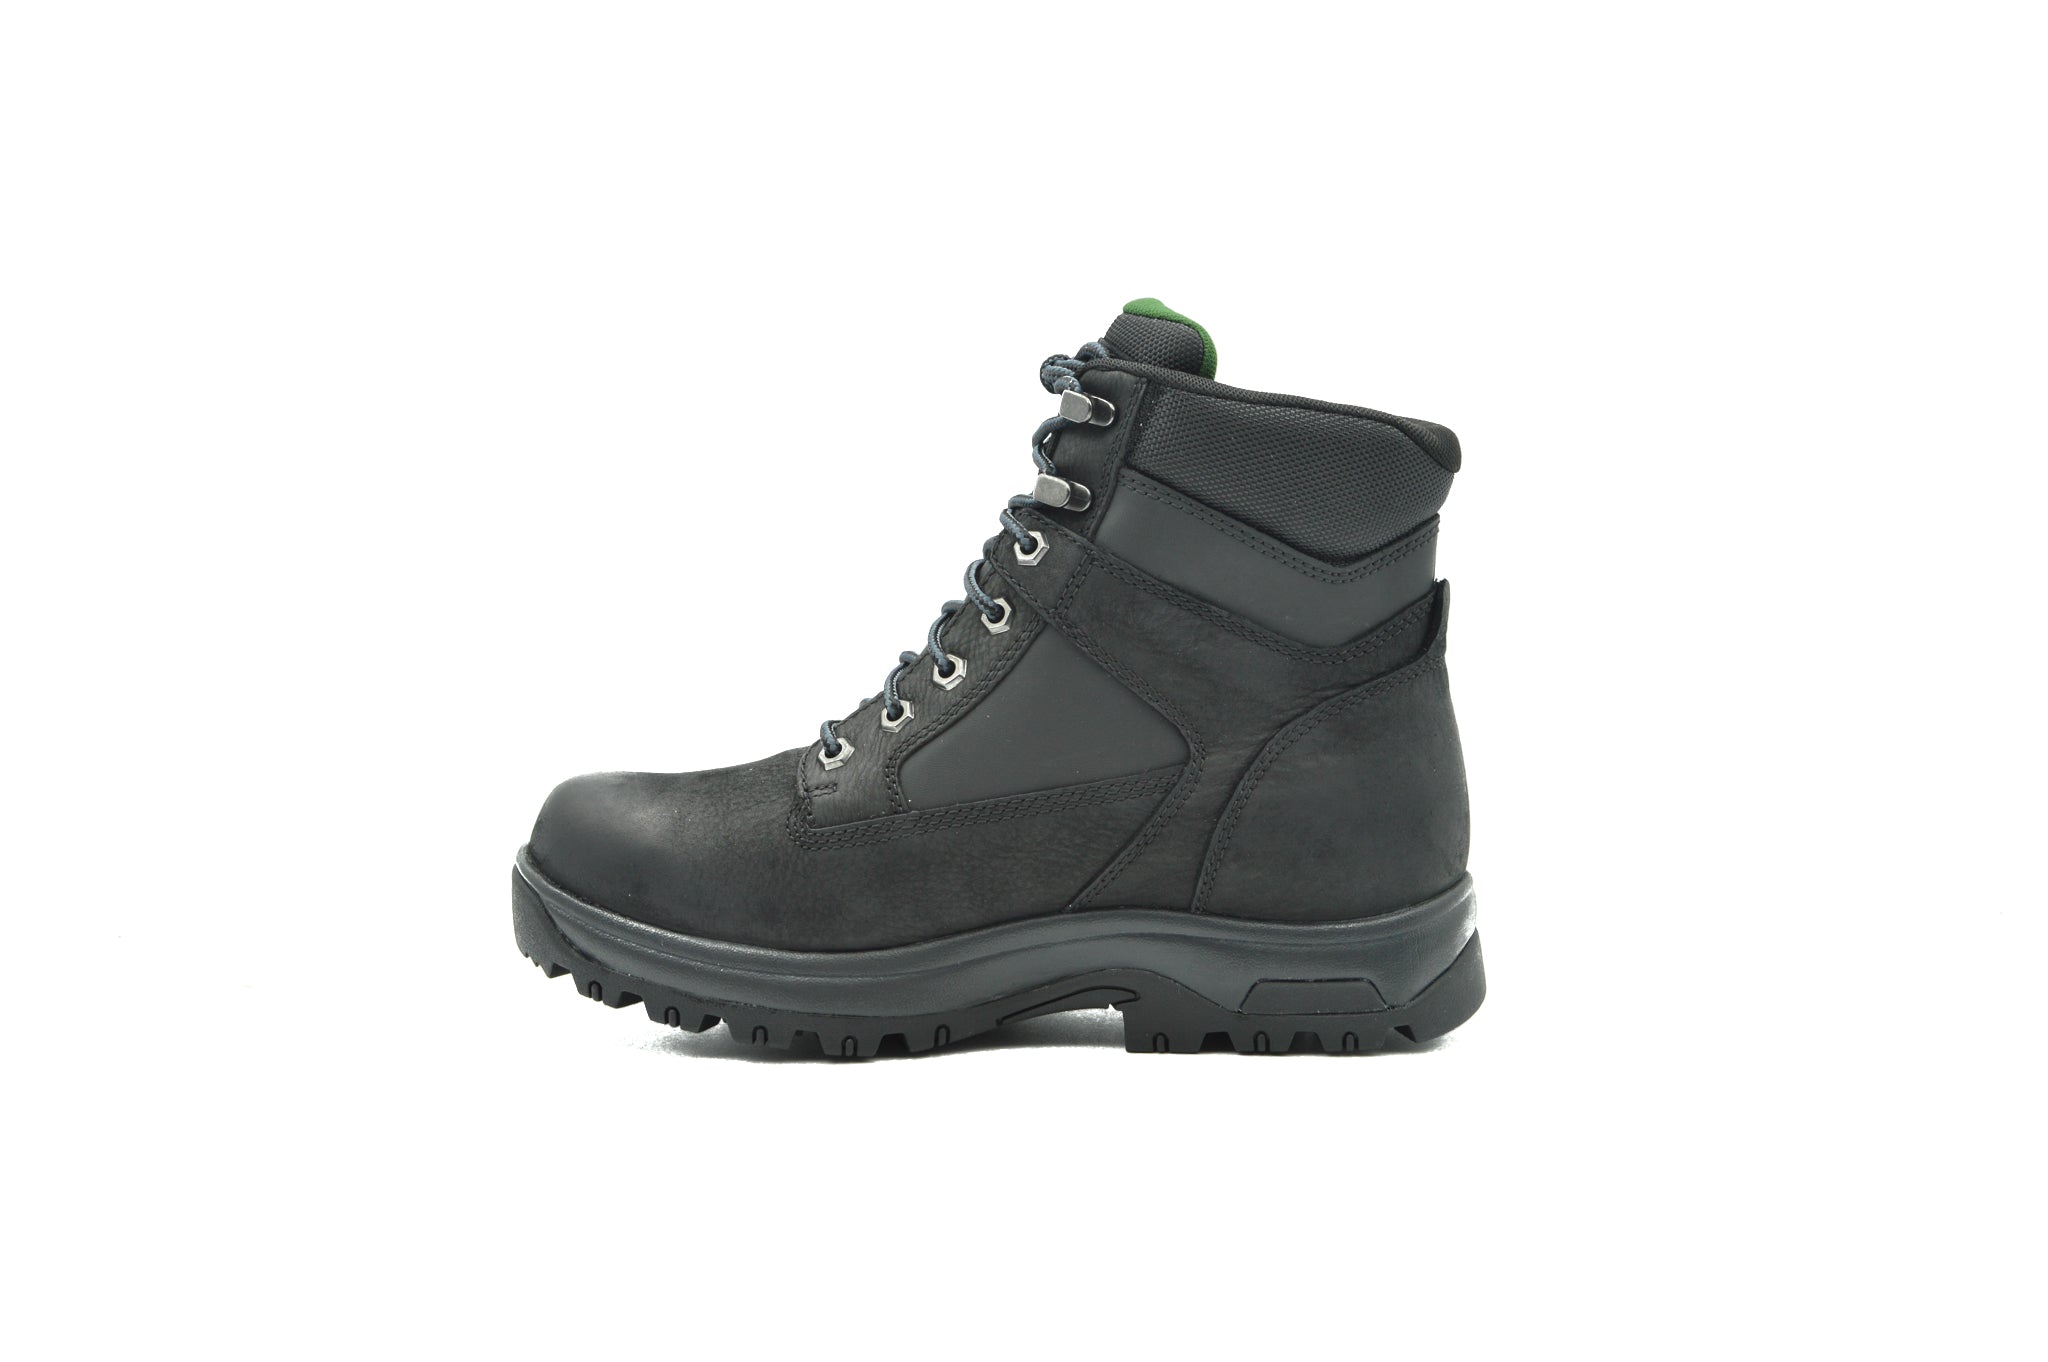 DUNHAM 8000 WORKS 6IN BOOT